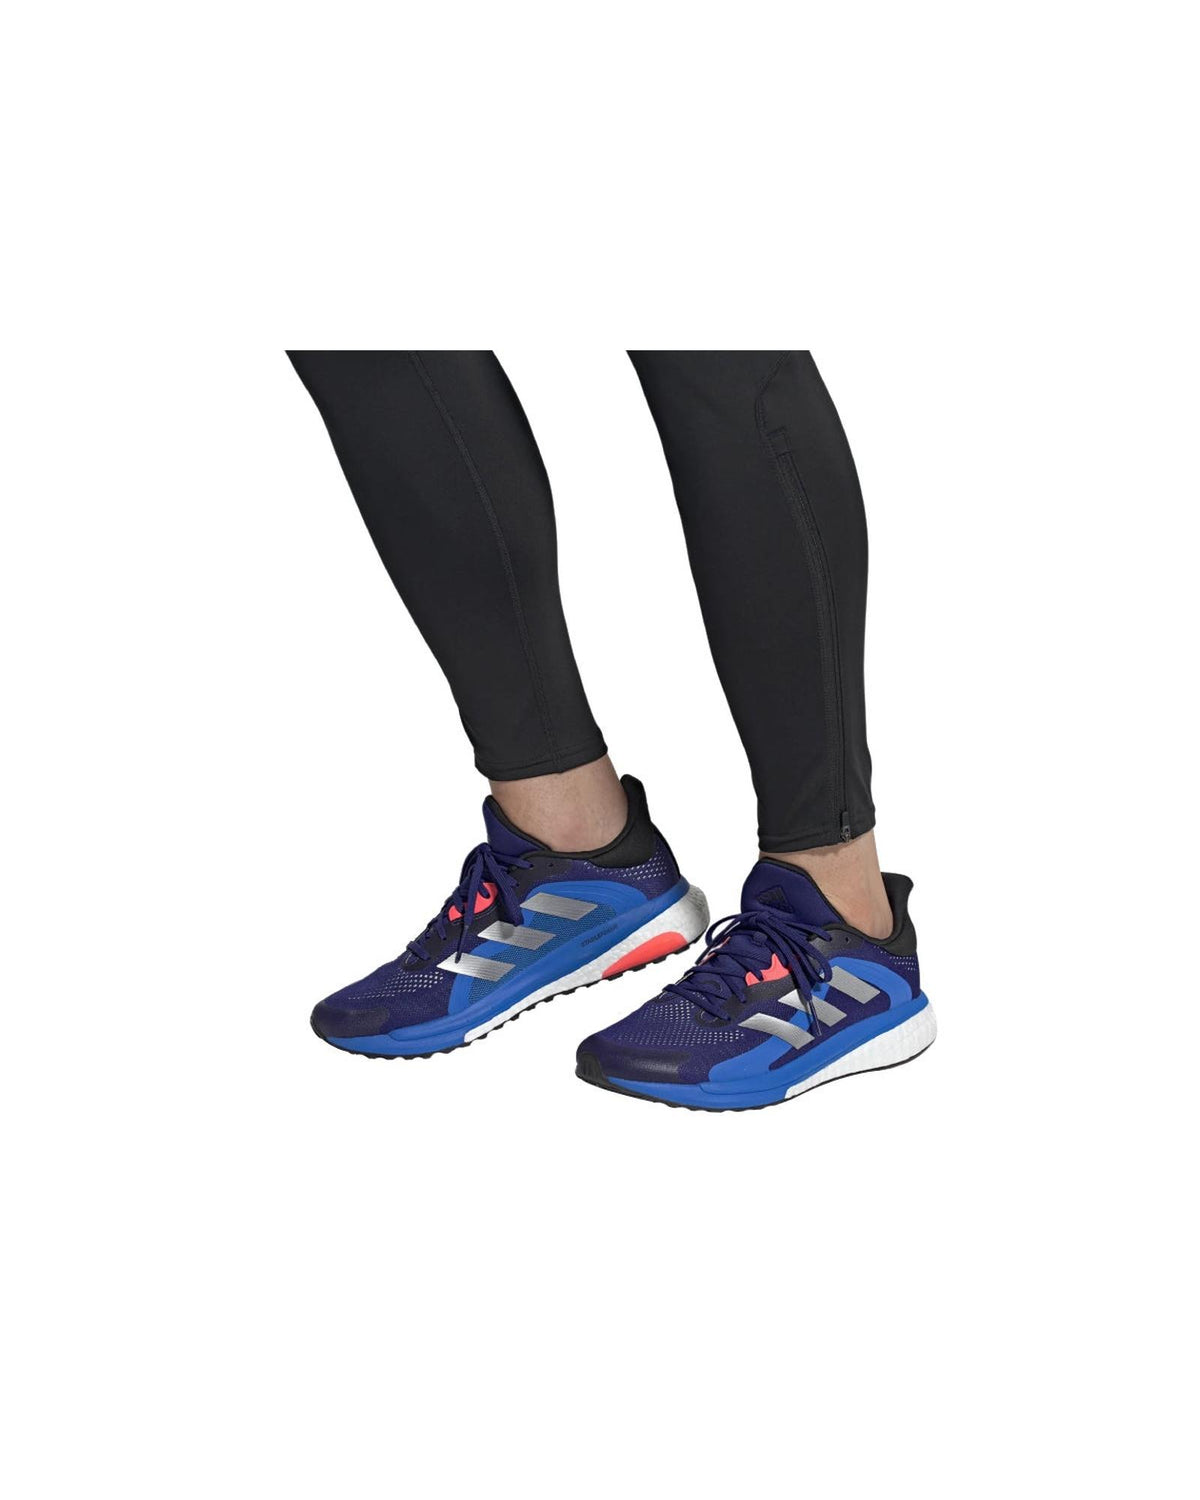 Flexible Running Shoes with Energized Boost Technology - 10.5 US